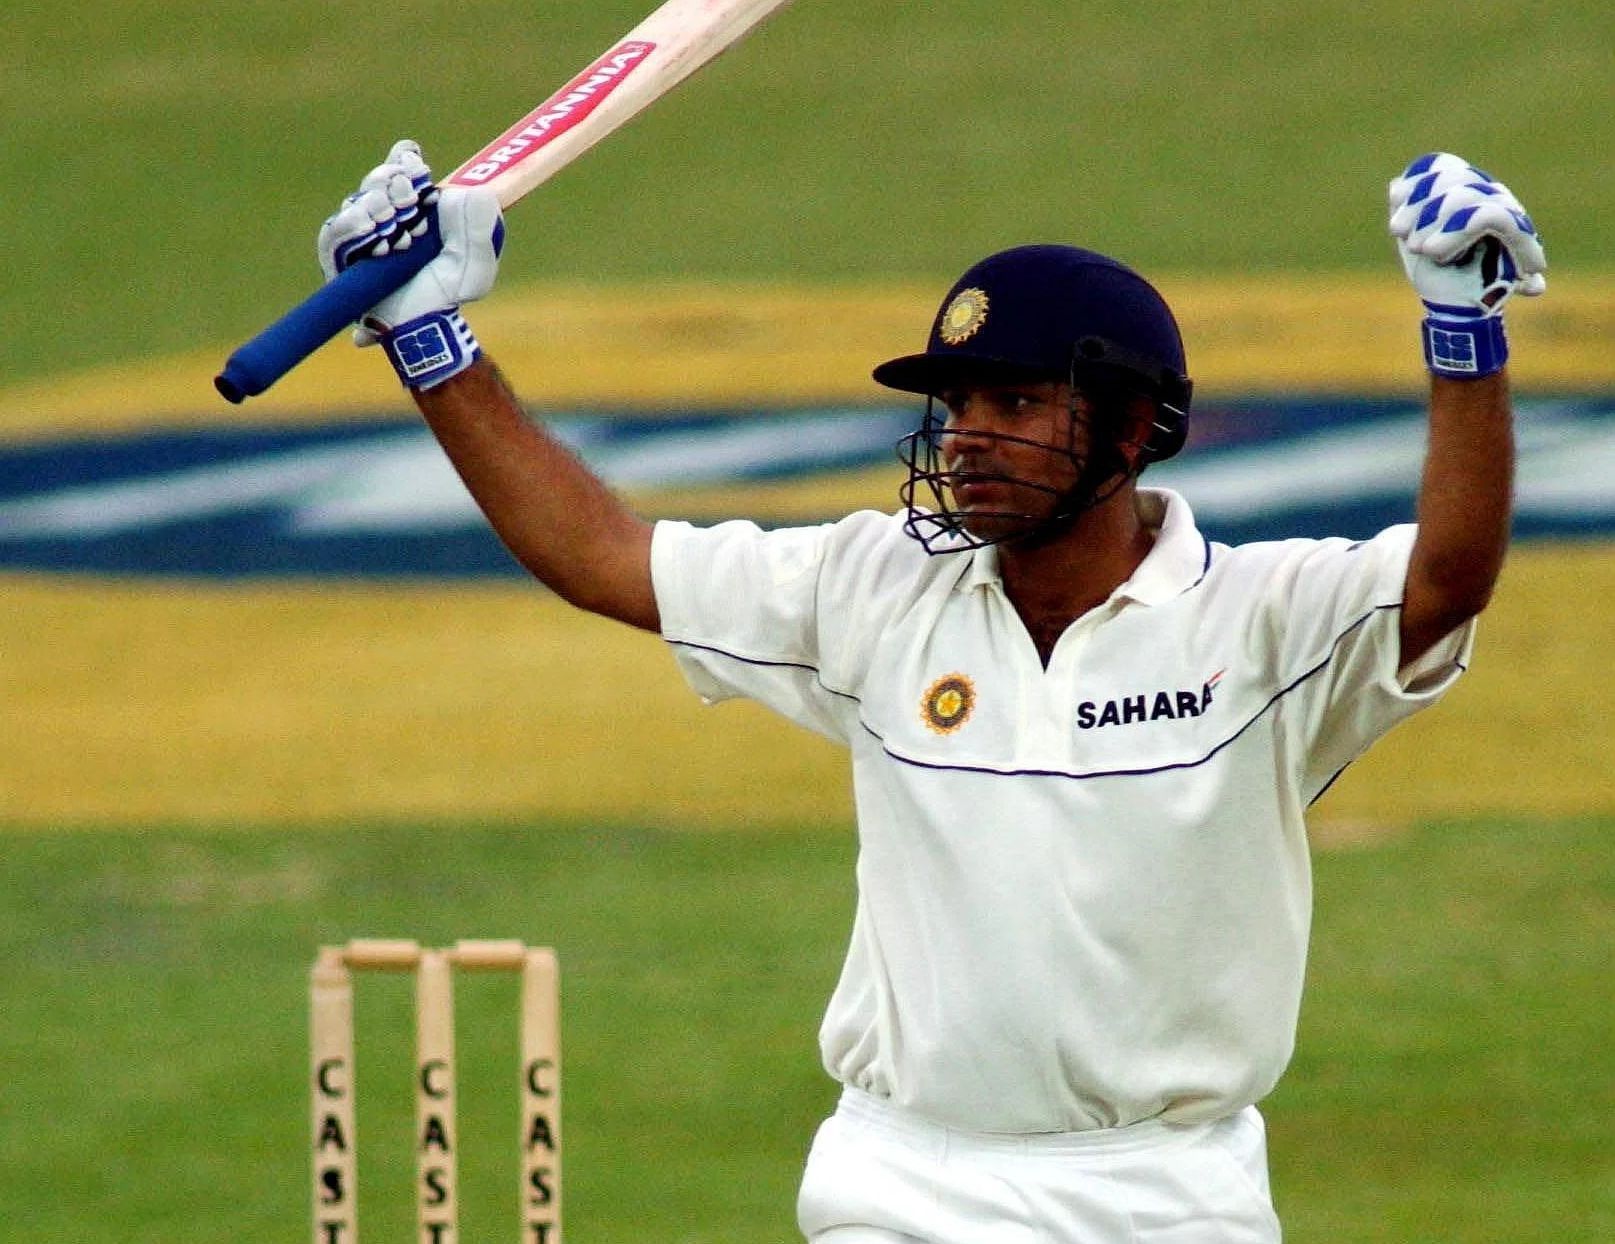 Virender Sehwag celebrates his century on Test debut in Bloemfontein. Pic: Getty Images